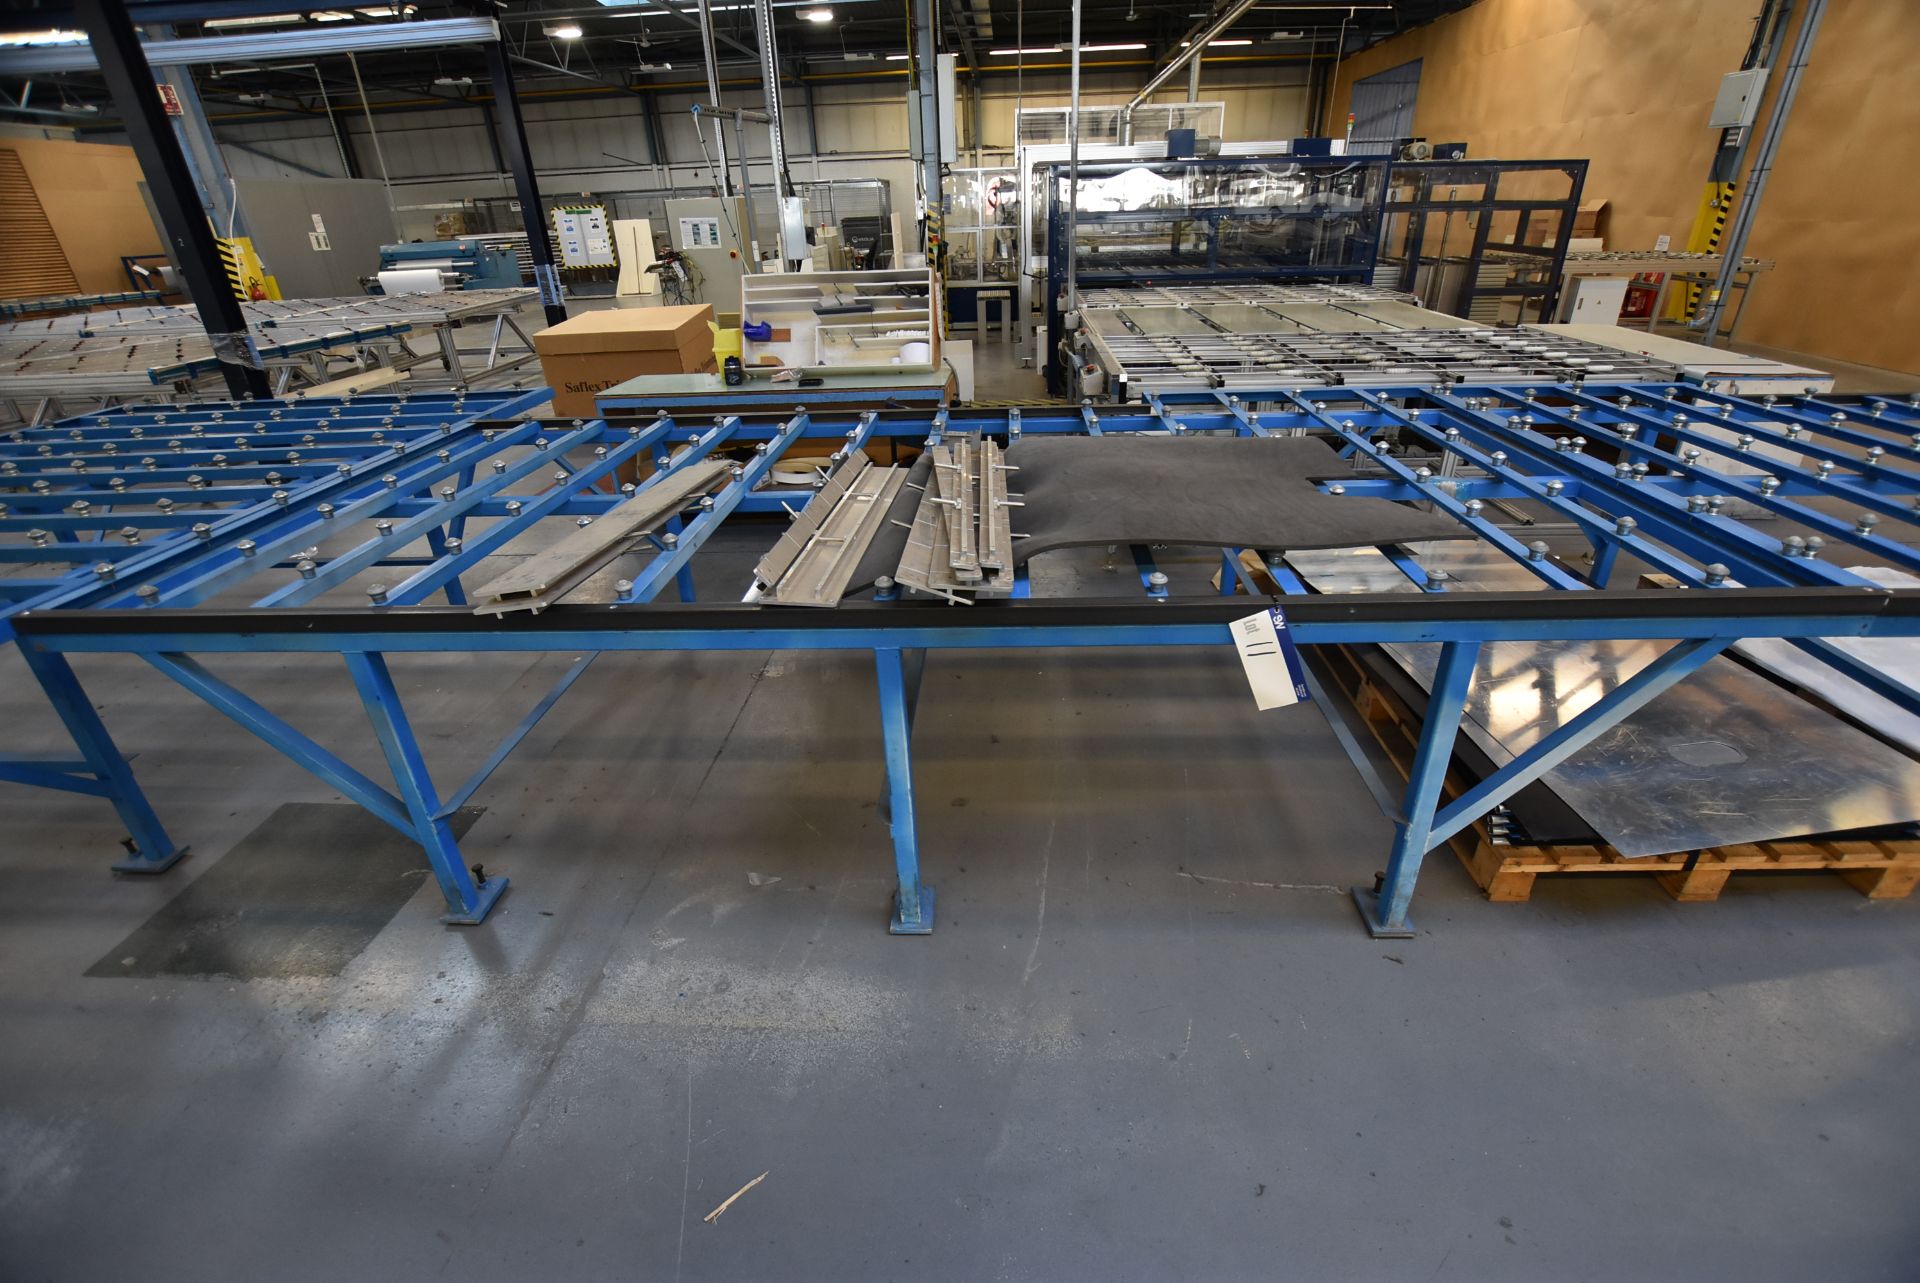 Stationary Steel Framed Roller Ball Feed Table, approx. 3.77m x 1.8m x 870mm high